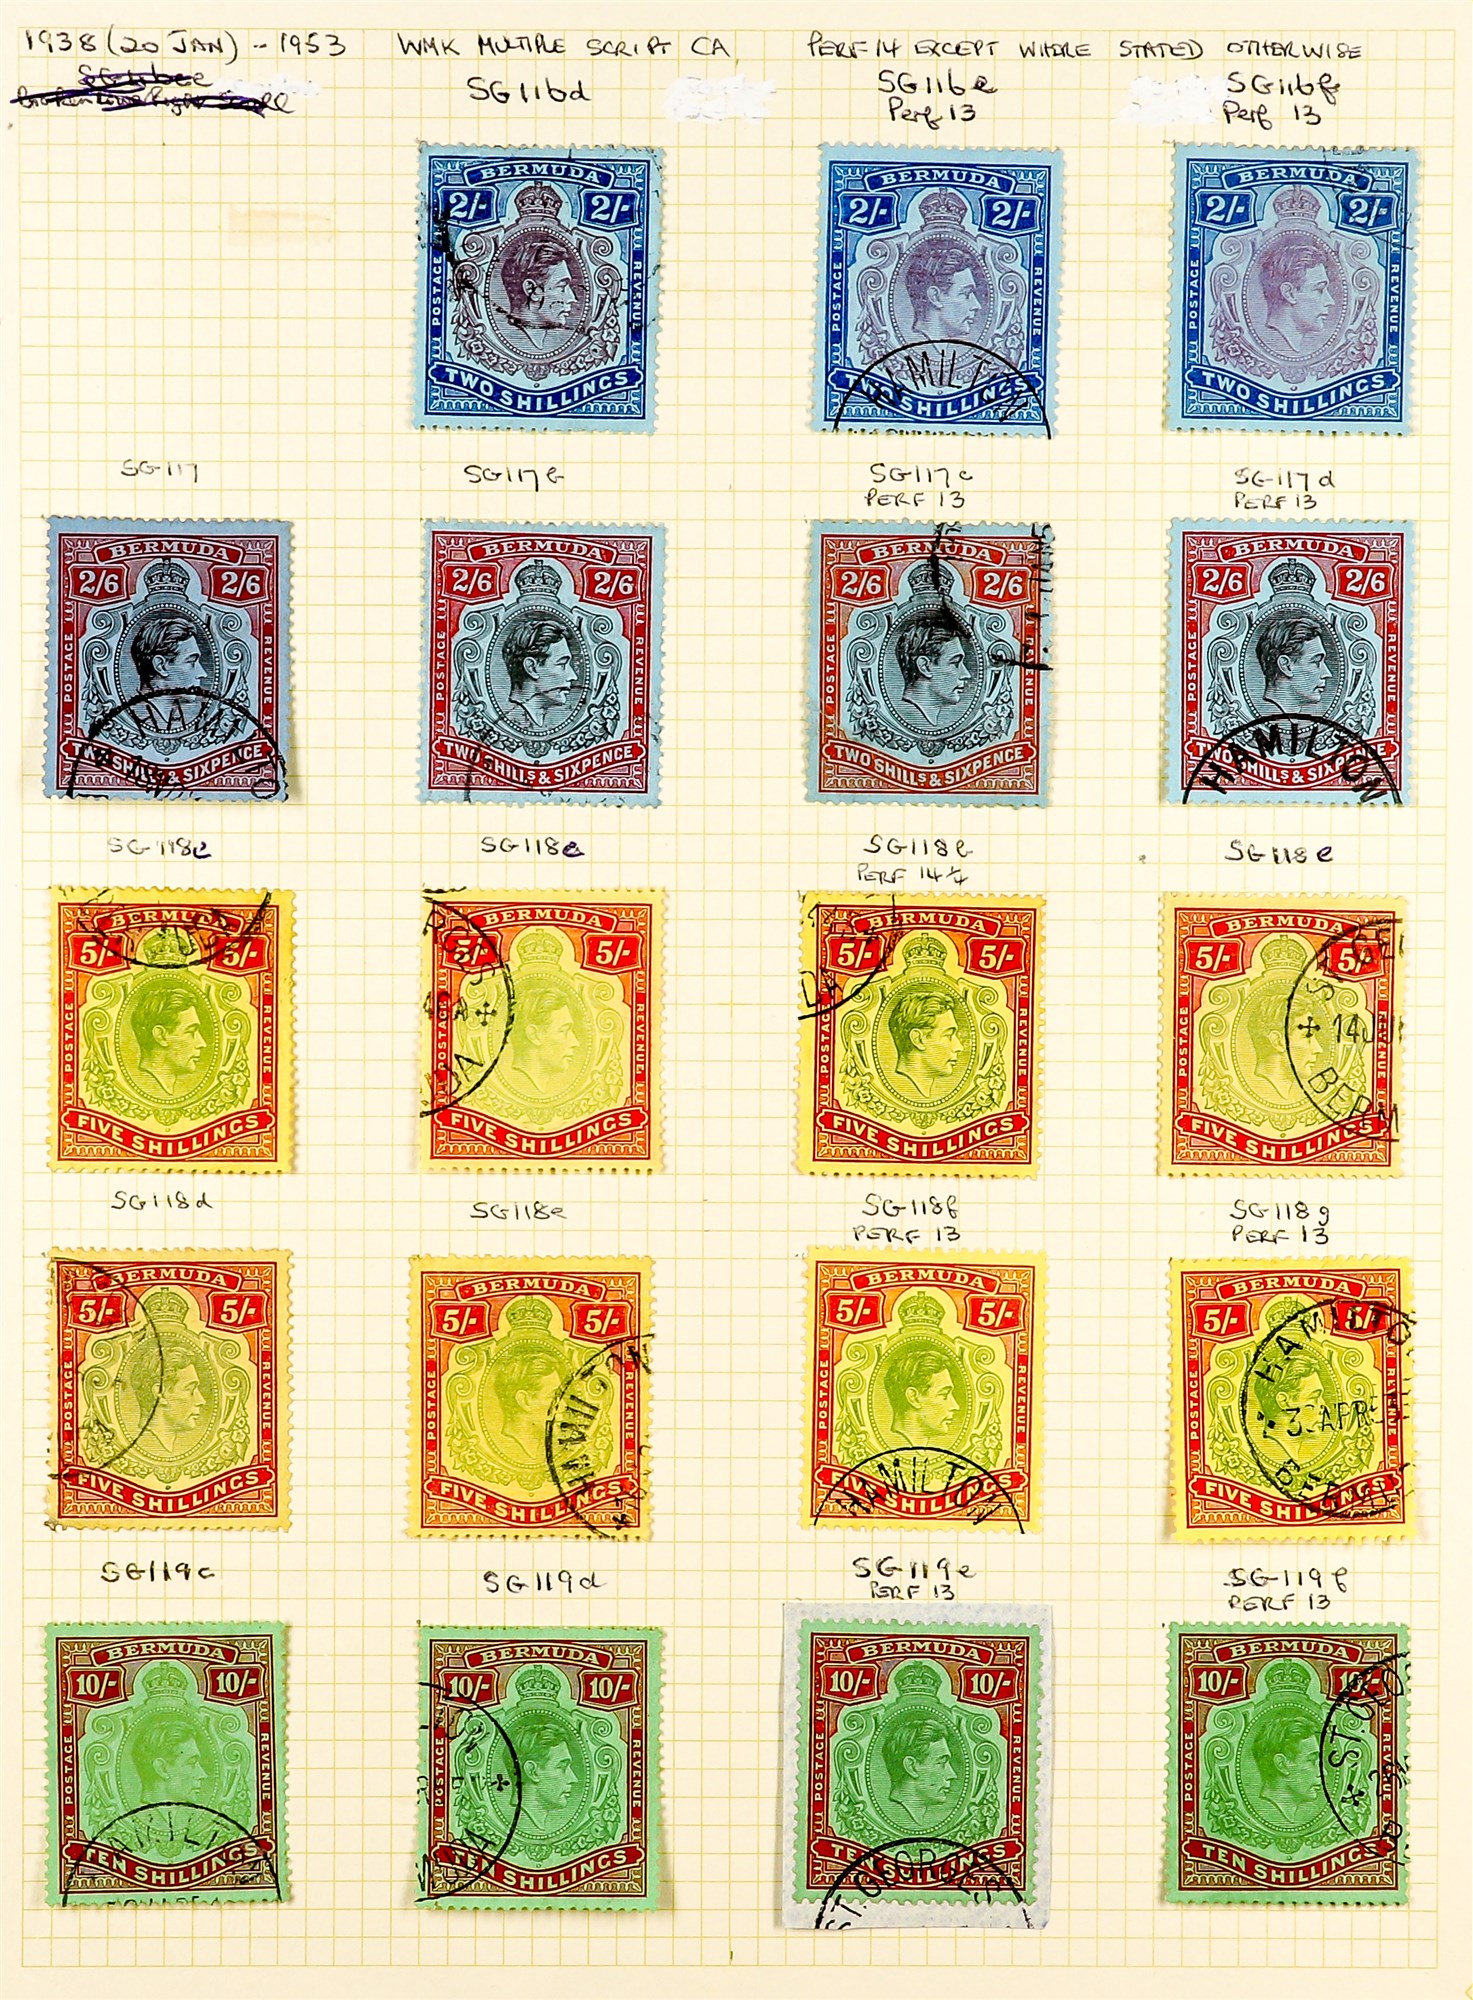 BERMUDA 1937 - 1949 FINE USED COLLECTION of over 60 stamps on pages, includes 1938-53 set with - Image 2 of 4